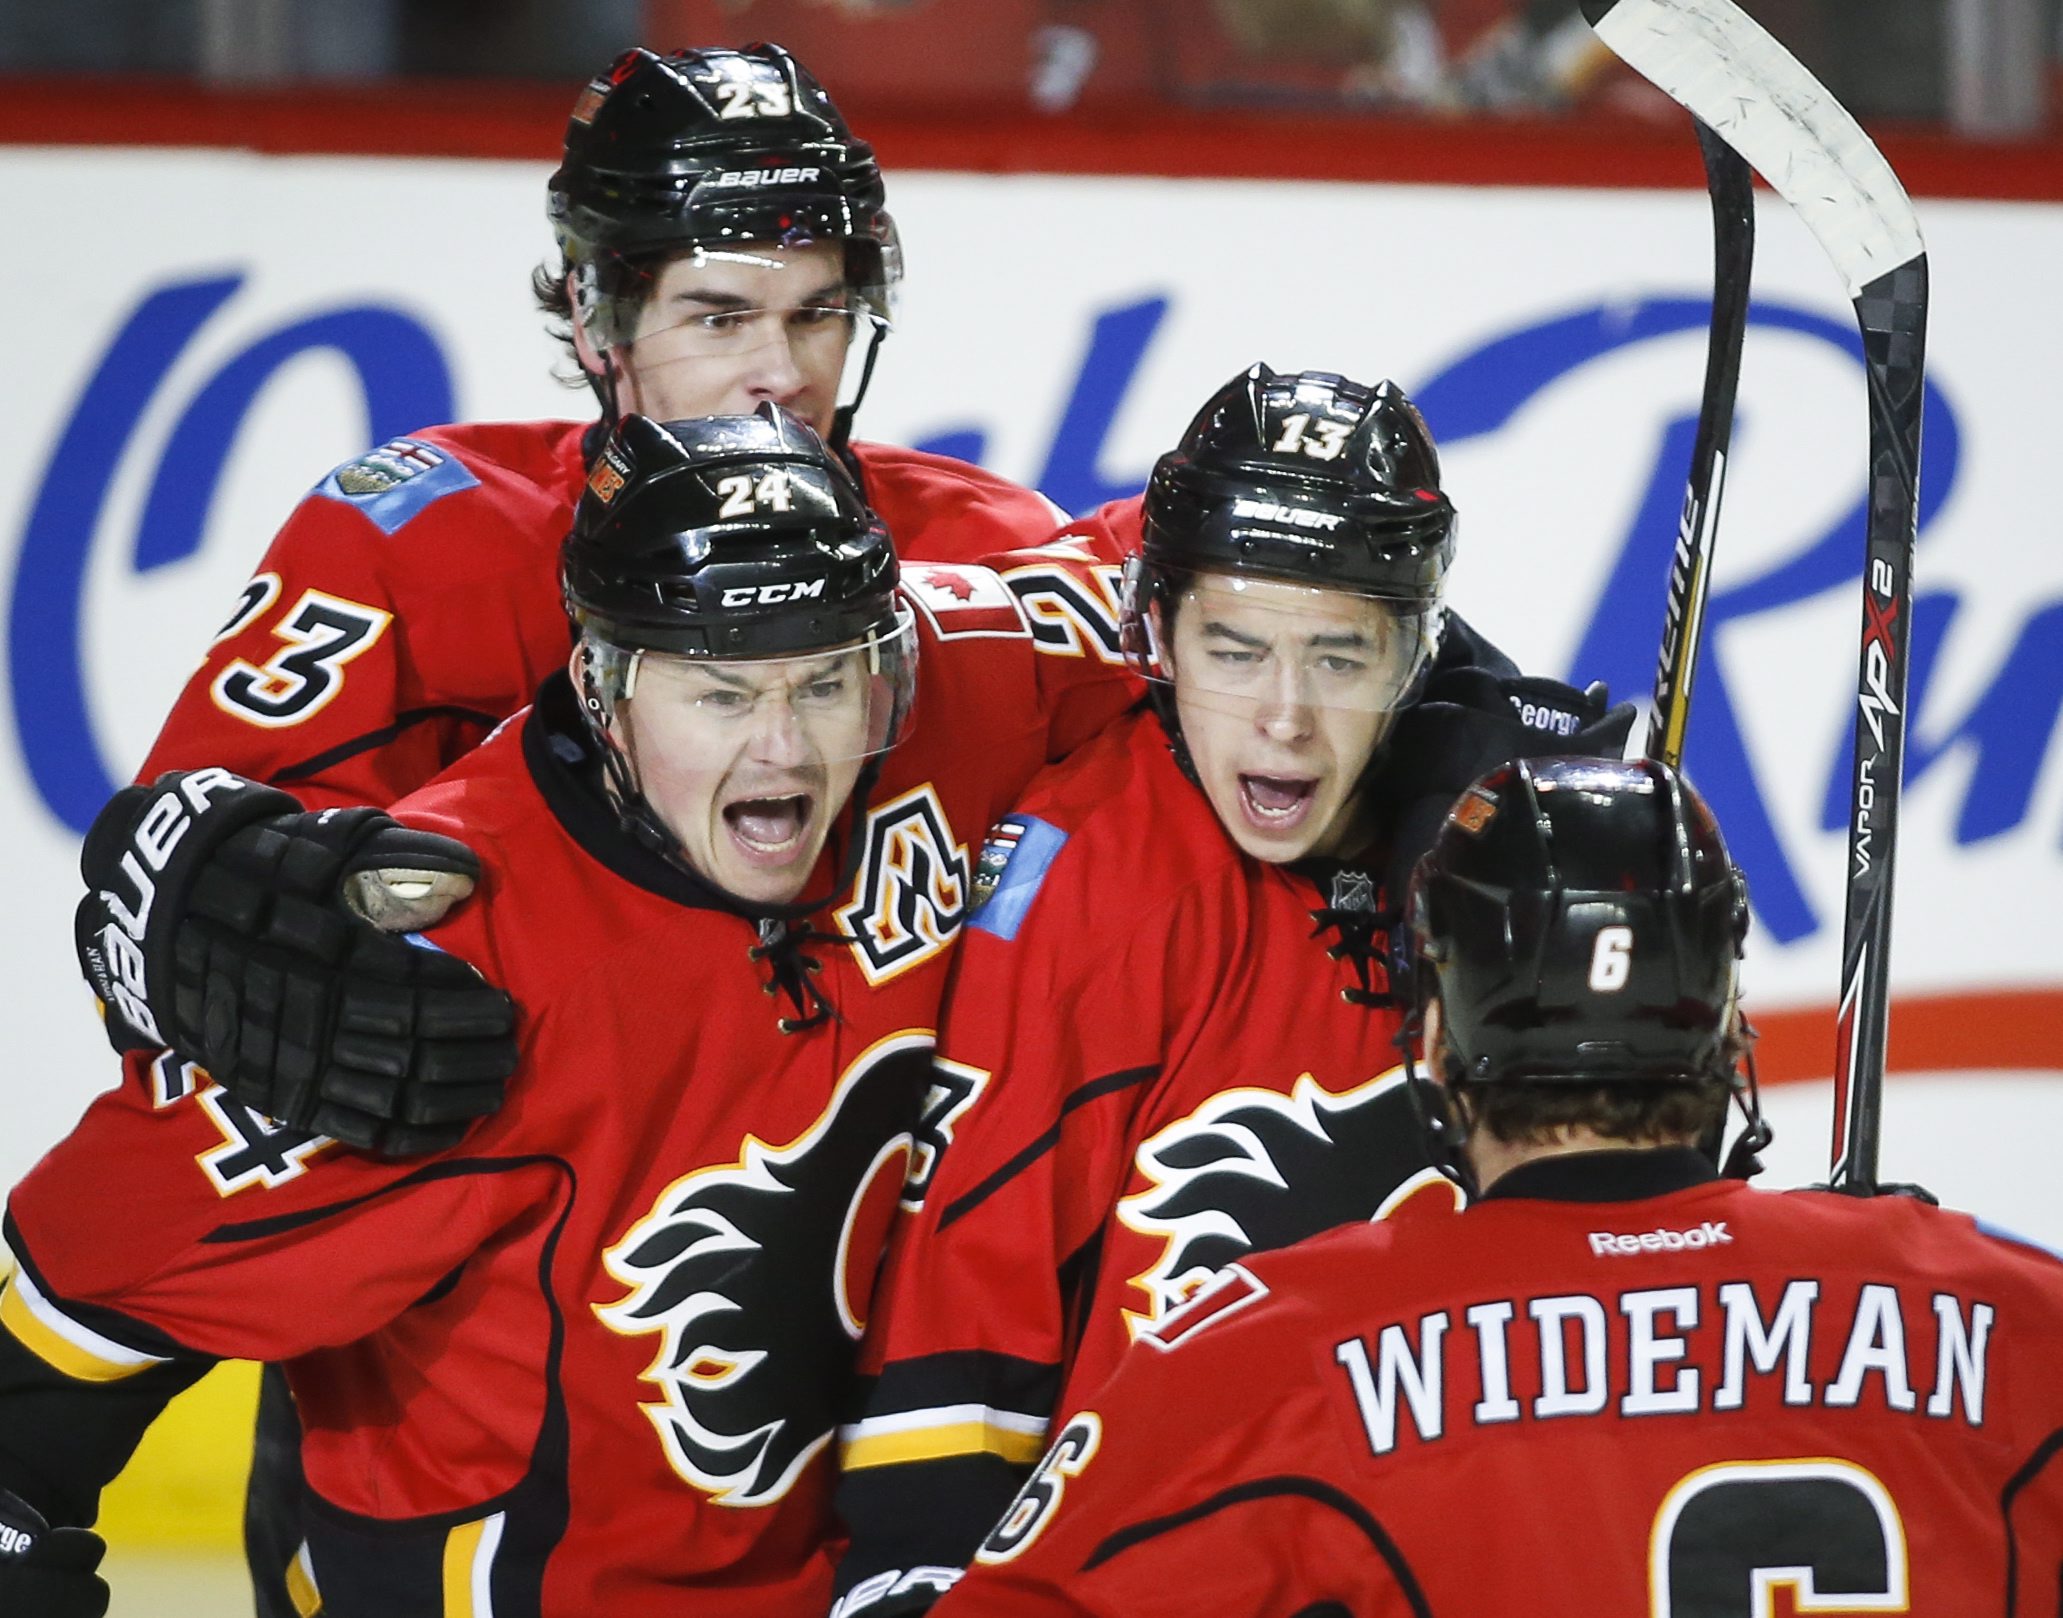 Calgary Flames' Johnny Gaudreau, center right, celebrates his goal with against the Vancouver Canucks with teammates Sean Monahan, left, Jiri Hudler, center left, from the Czech Republic and Dennis Wideman during the first period of Game 4 of a first-round NHL hockey playoff series, Tuesday, April 21, 2015, in Calgary, Alberta. (Jeff McIntosh/The Canadian Press via AP)